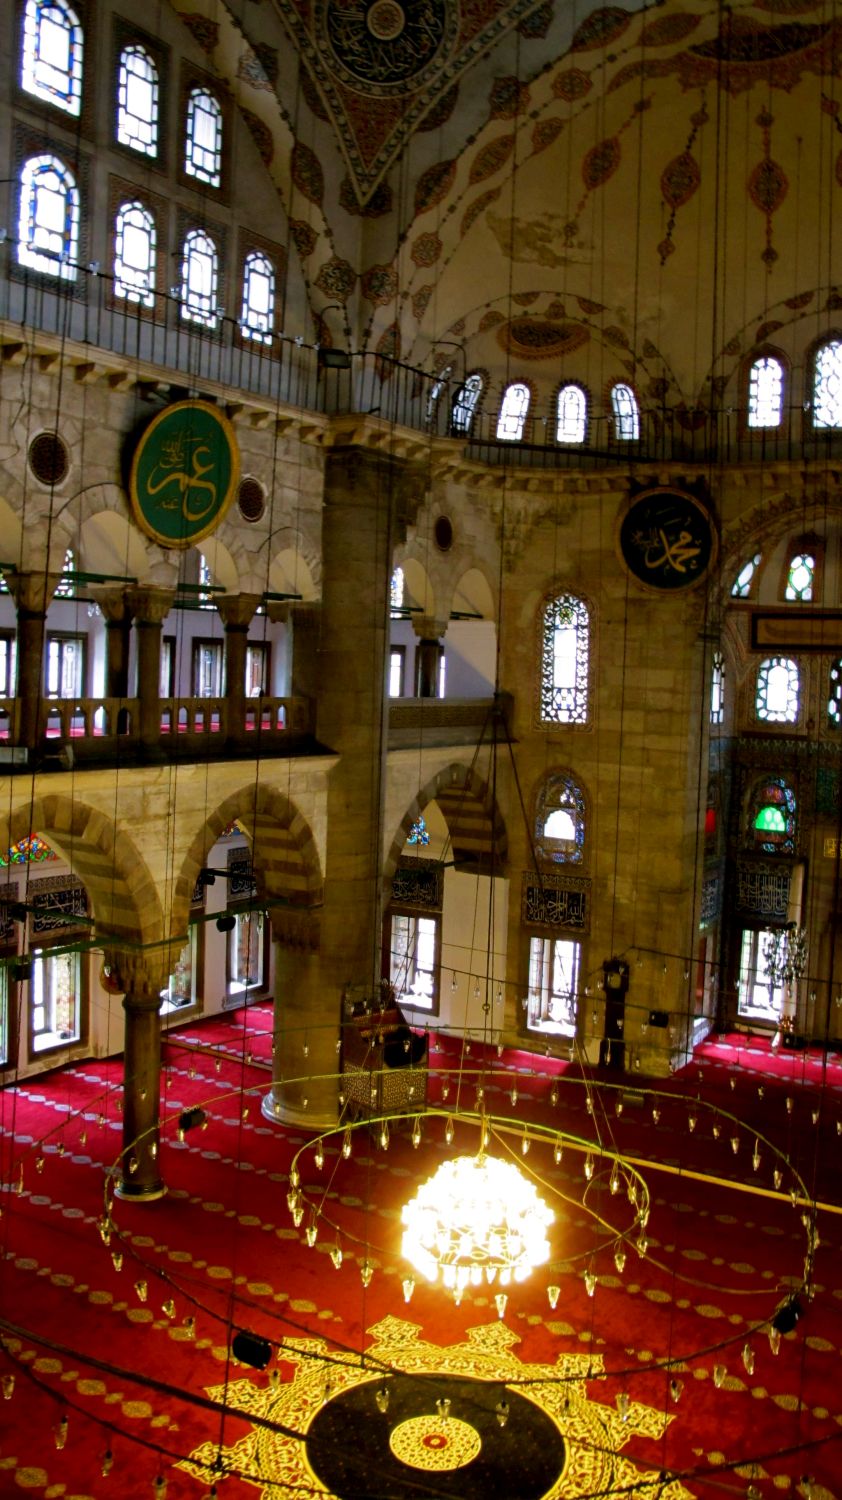 Interior view from gallery across prayer hall to corner, with the edge of the mihrab visible to the right